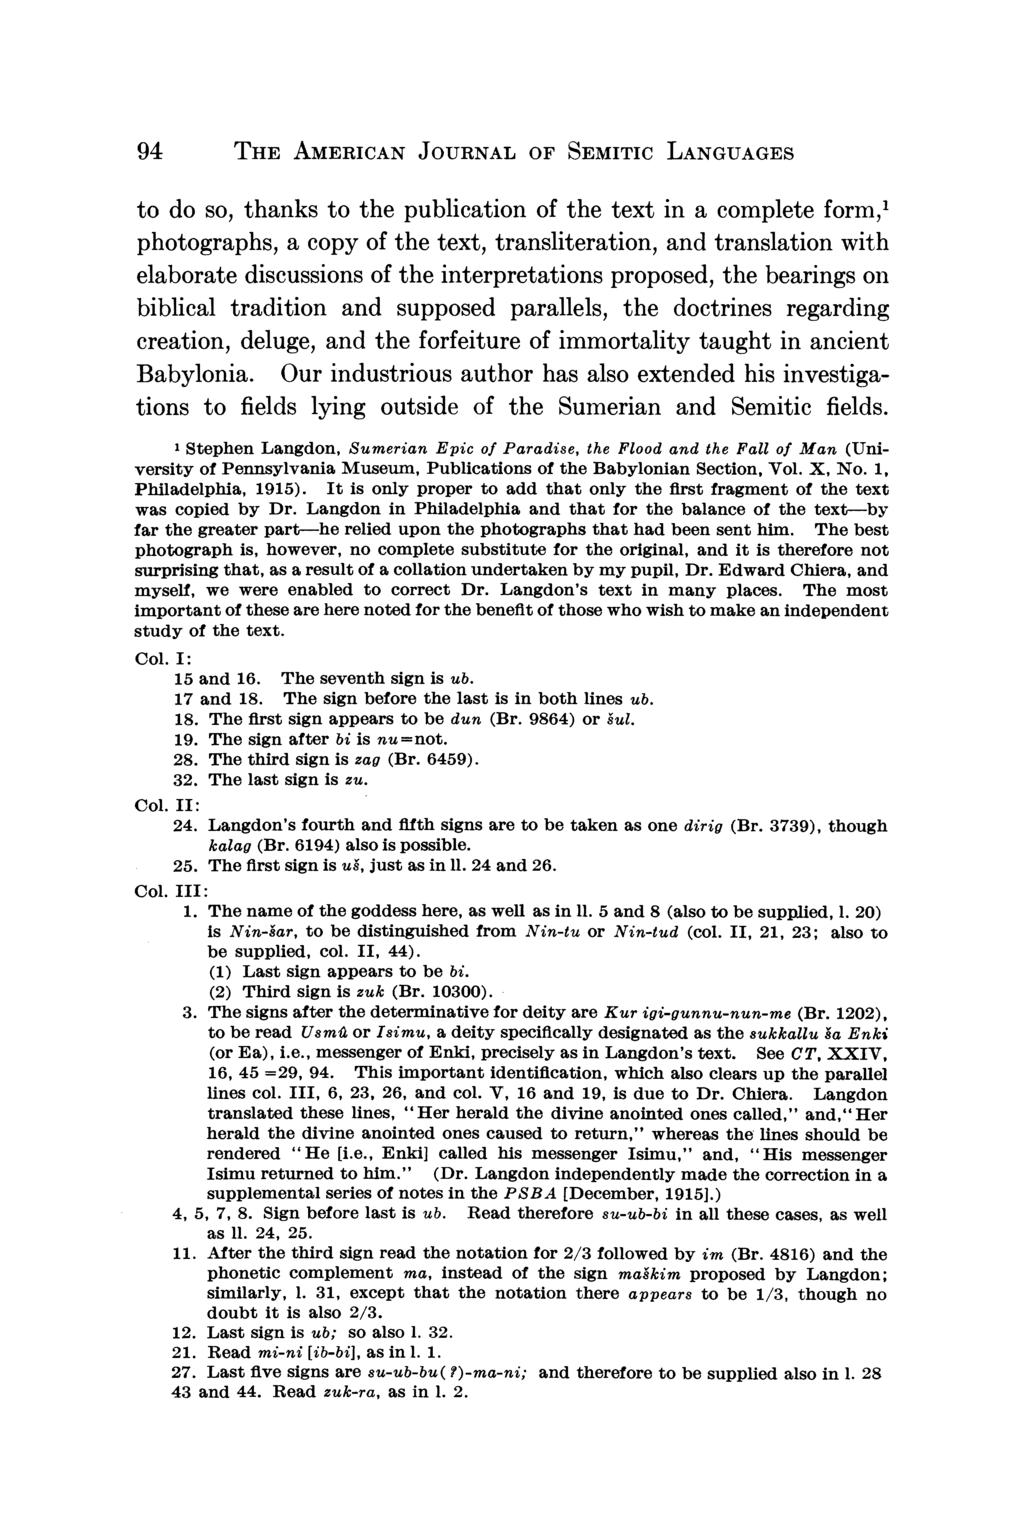 94 THE AMERICAN JOURNAL OF SEMITIC LANGUAGES to do so, thanks to the publication of the text in a complete form,' photographs, a copy of the text, transliteration, and translation with elaborate